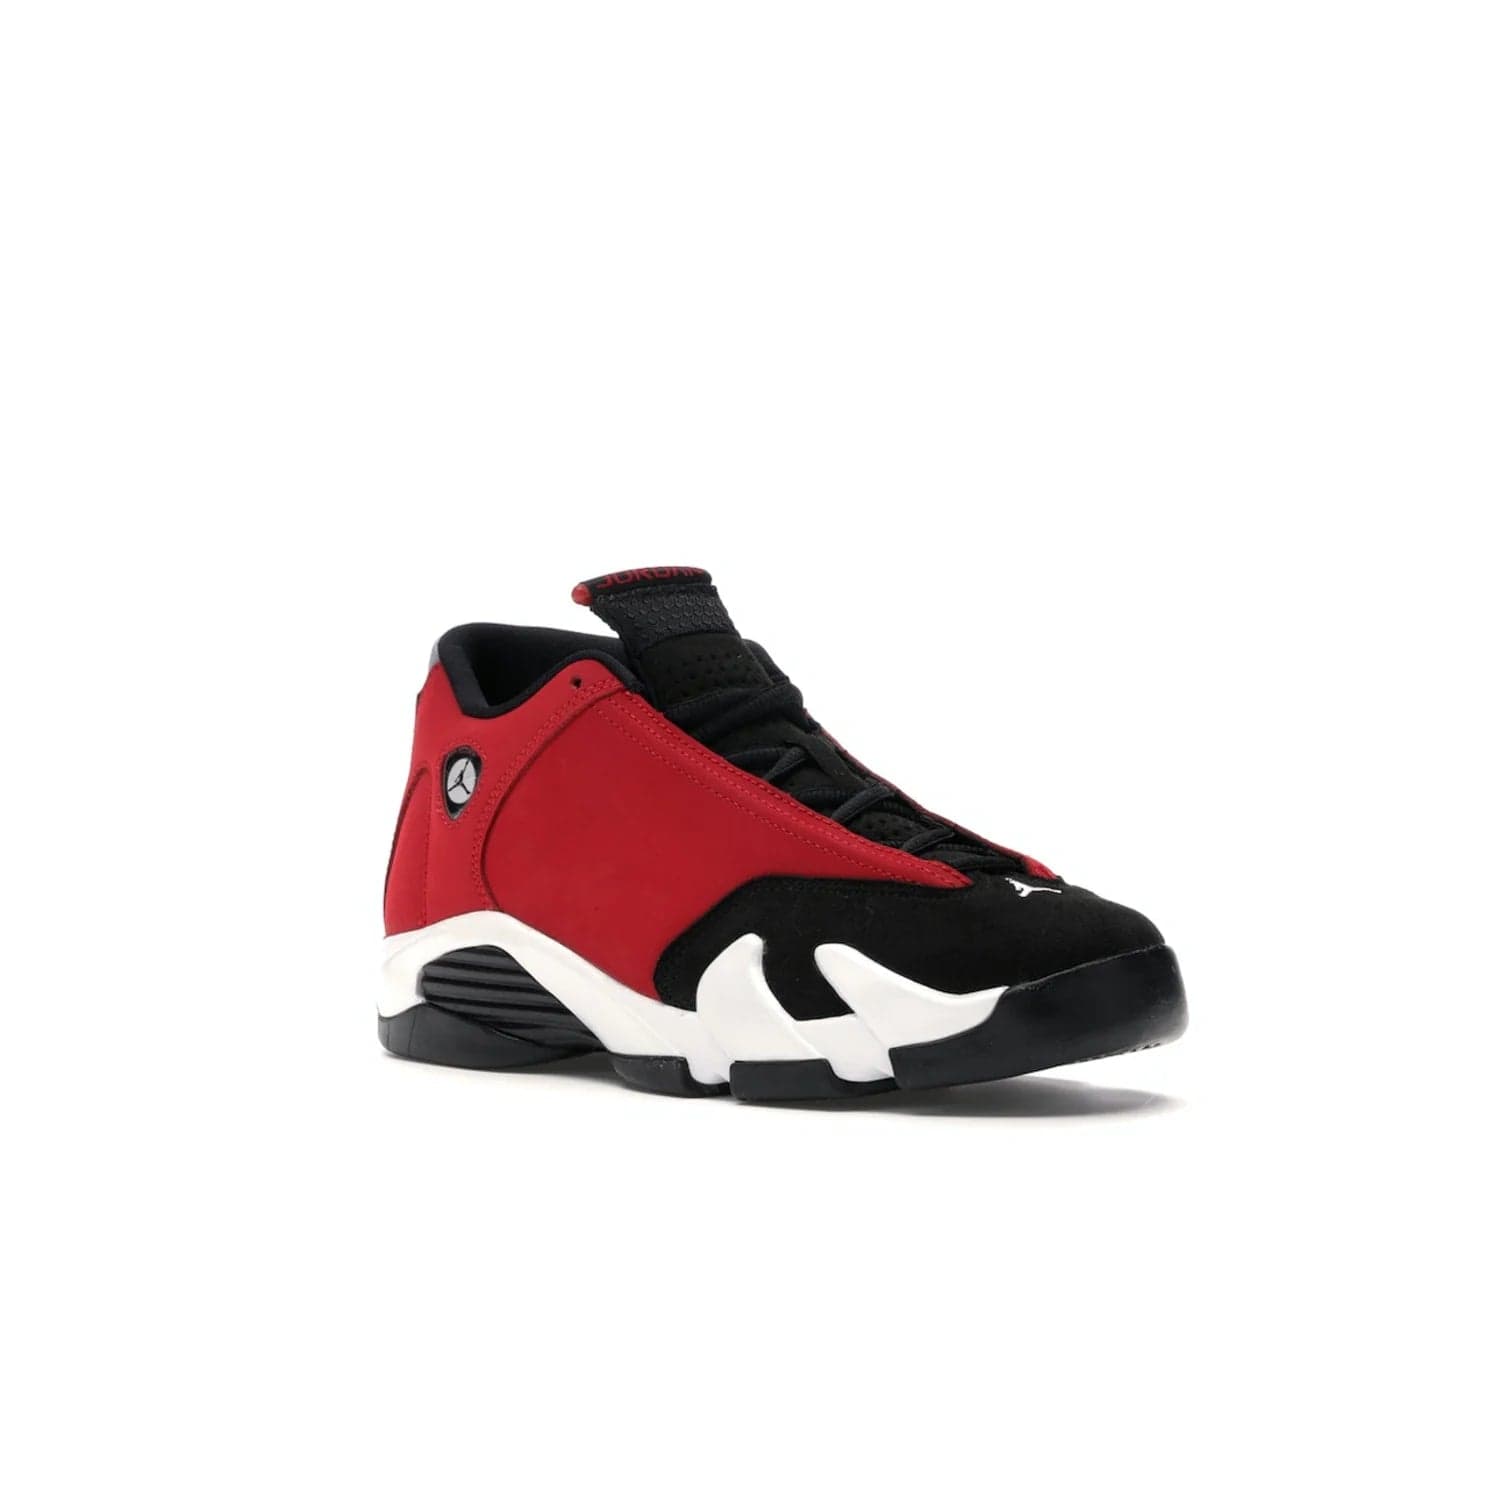 Jordan 14 Retro Gym Red Toro (GS) - Image 5 - Only at www.BallersClubKickz.com - Introducing the Air Jordan 14 Retro Toro GS – perfect for young grade schoolers. Combining black and red suede, Zoom Air cushioning and a Jumpman logo. Get yours on 2 July for $140!